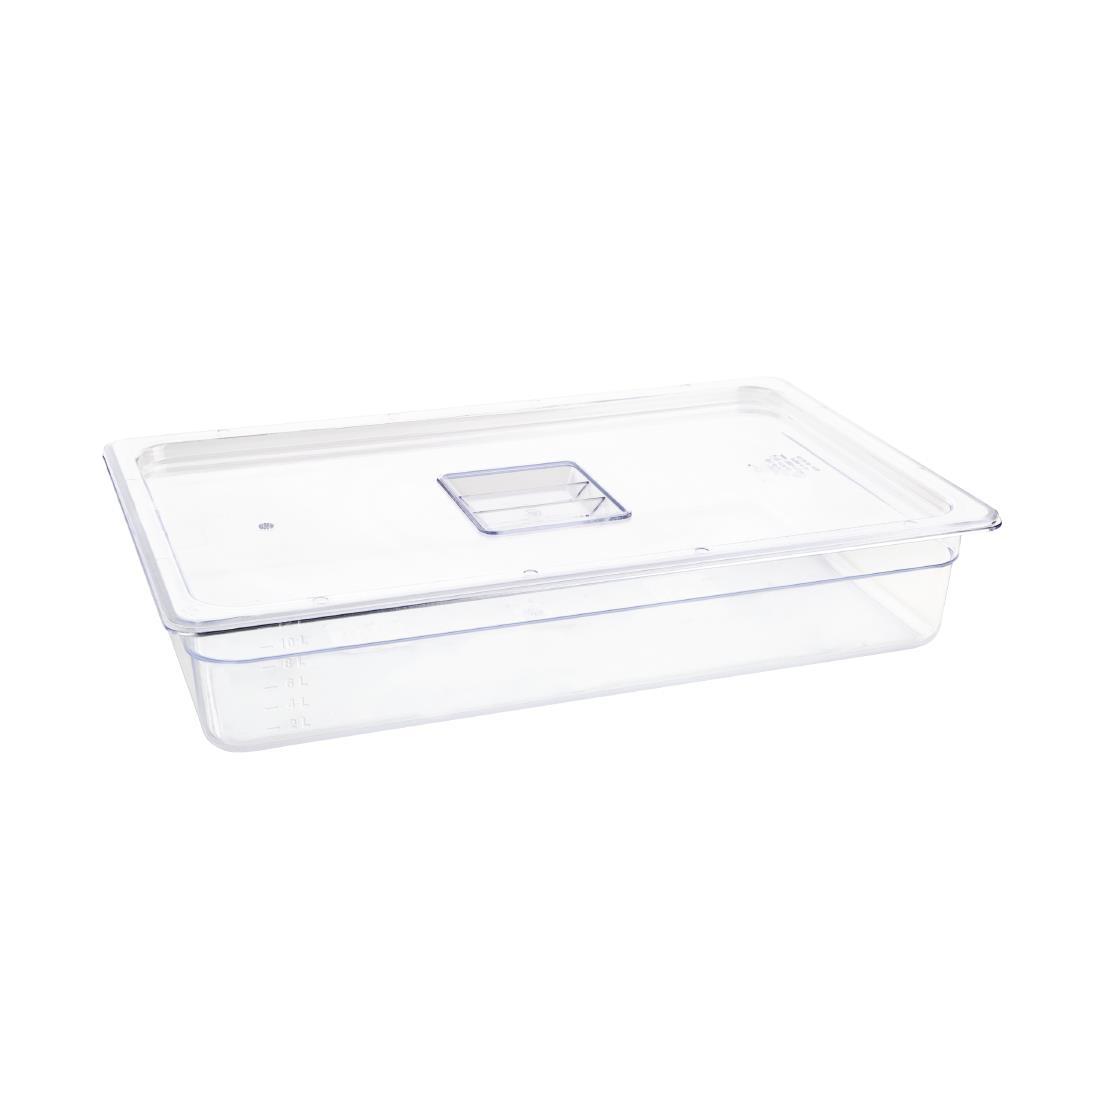 Vogue Polycarbonate 1/1 Gastronorm Container 100mm Clear - U225  - 2